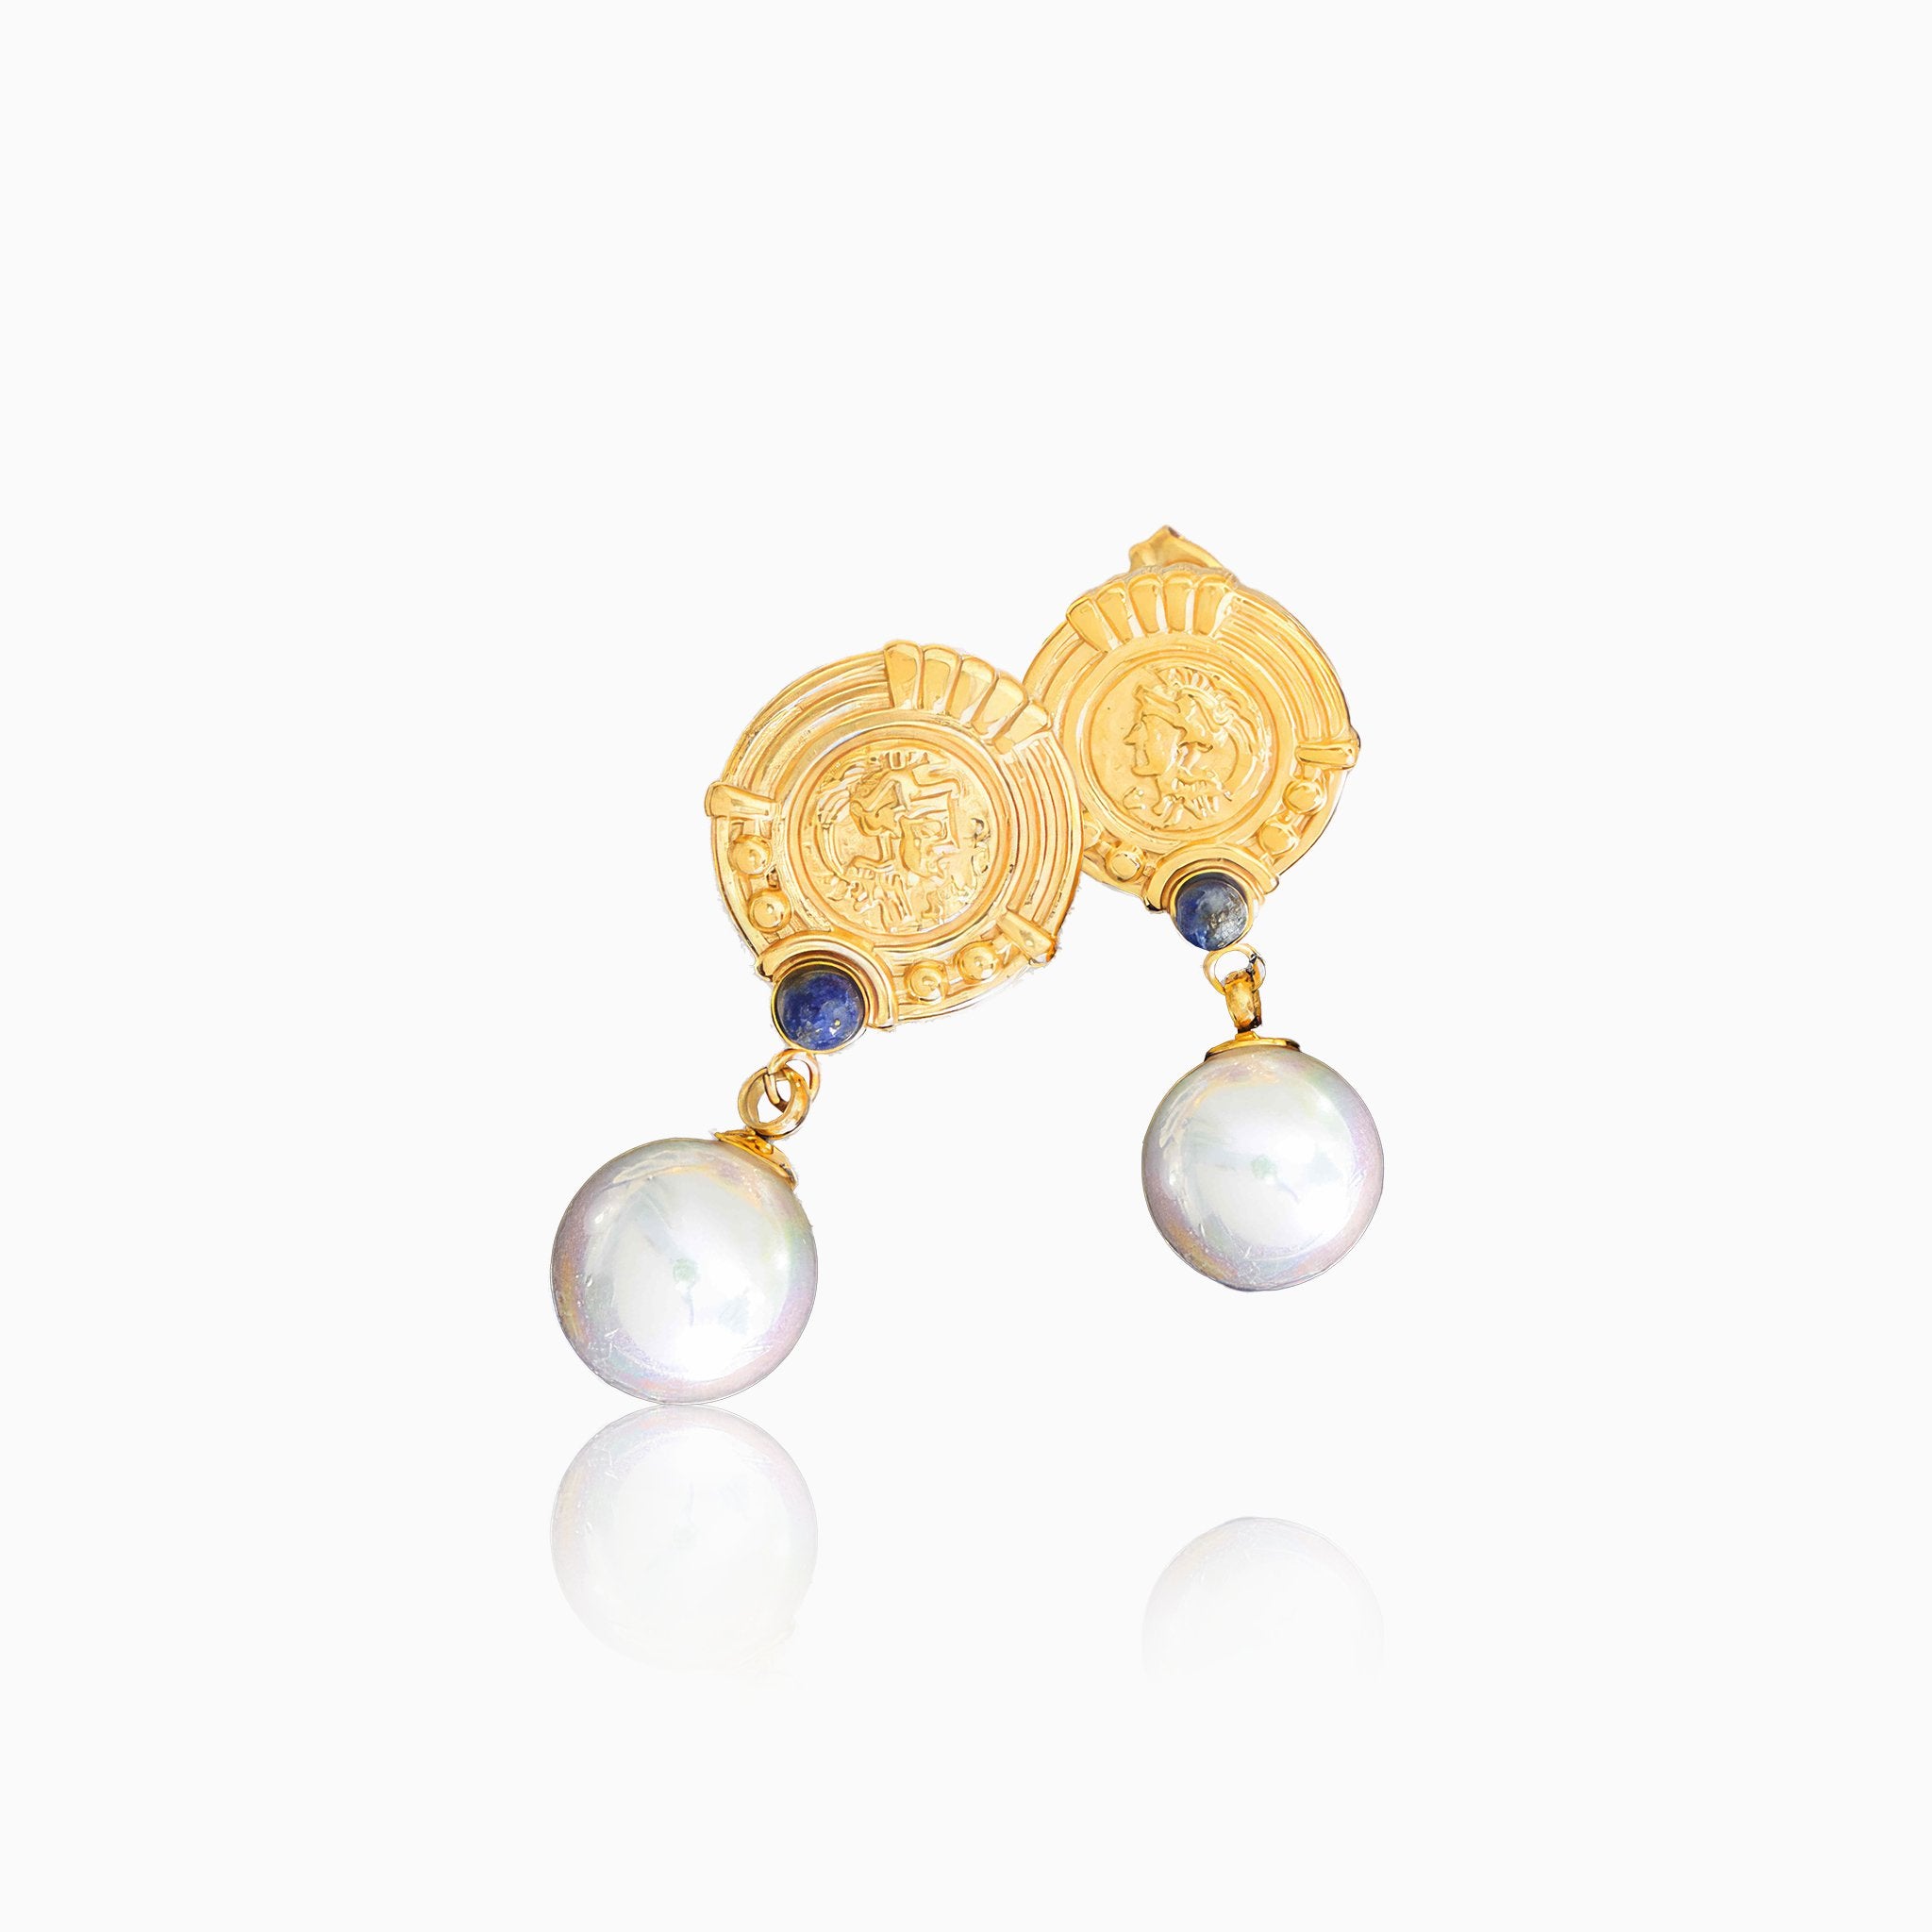 Circle Plaque Earrings with Pearl Accents - Nobbier - Earrings - 18K Gold And Titanium PVD Coated Jewelry